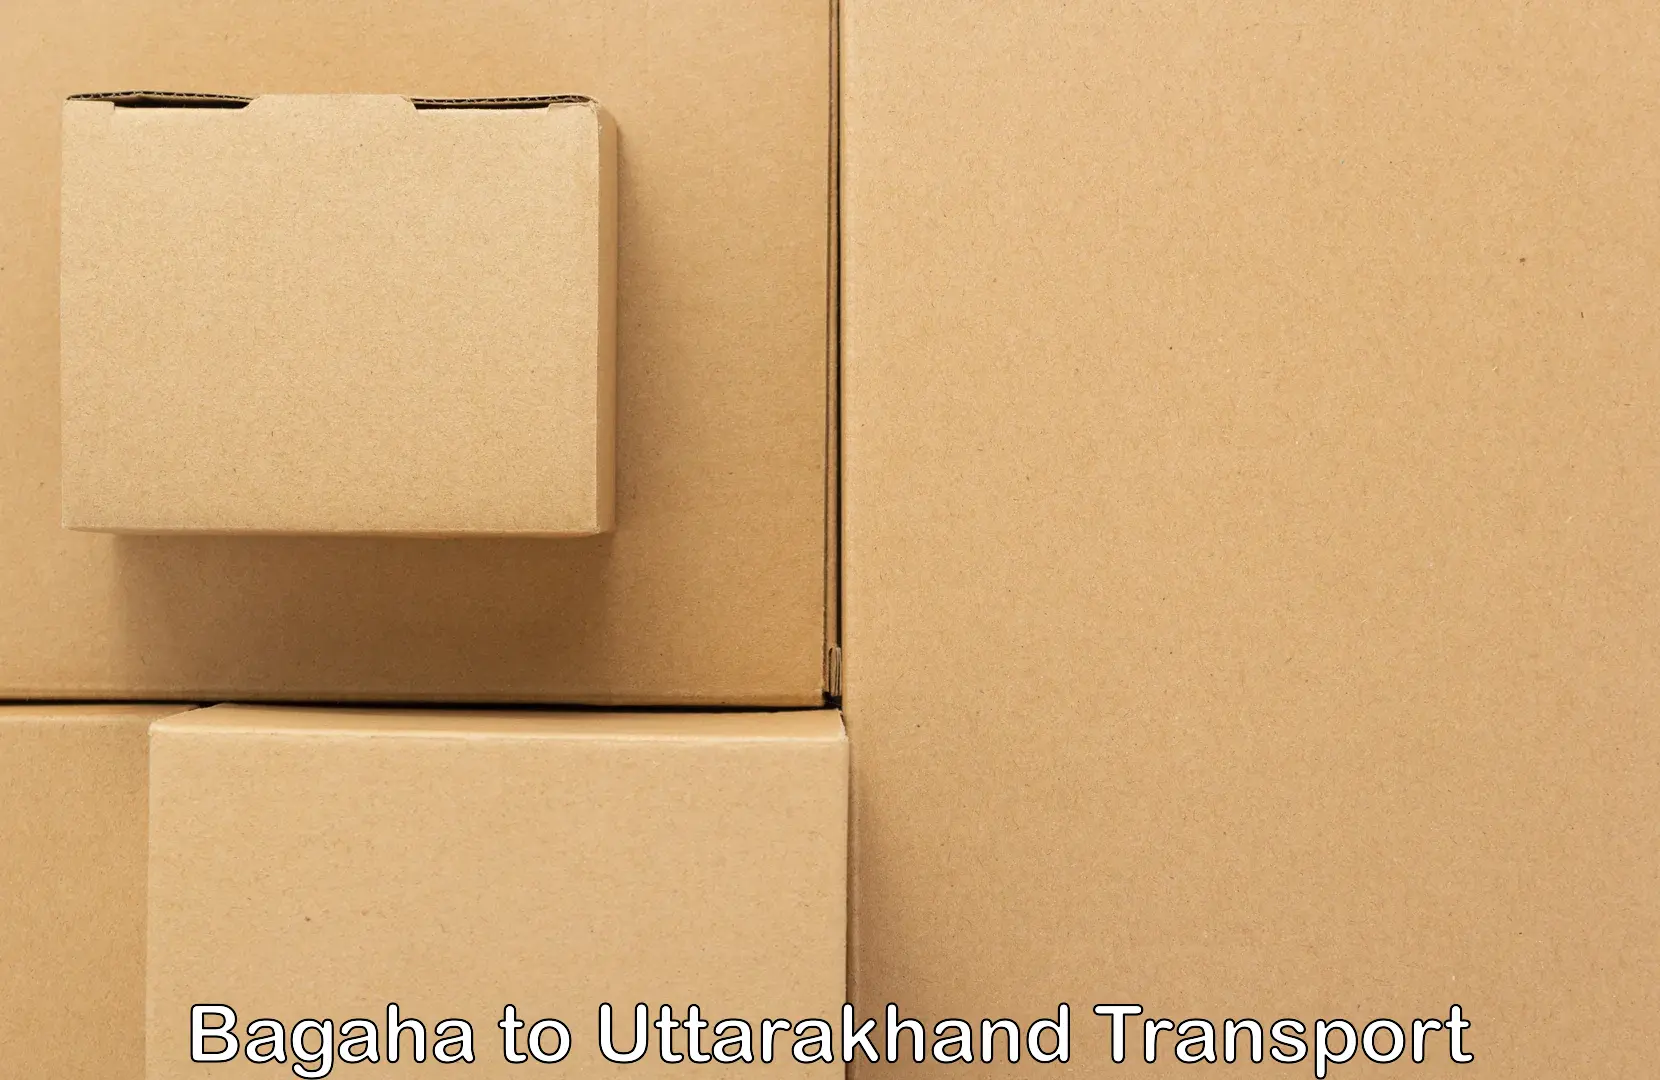 Pick up transport service Bagaha to Rudrapur